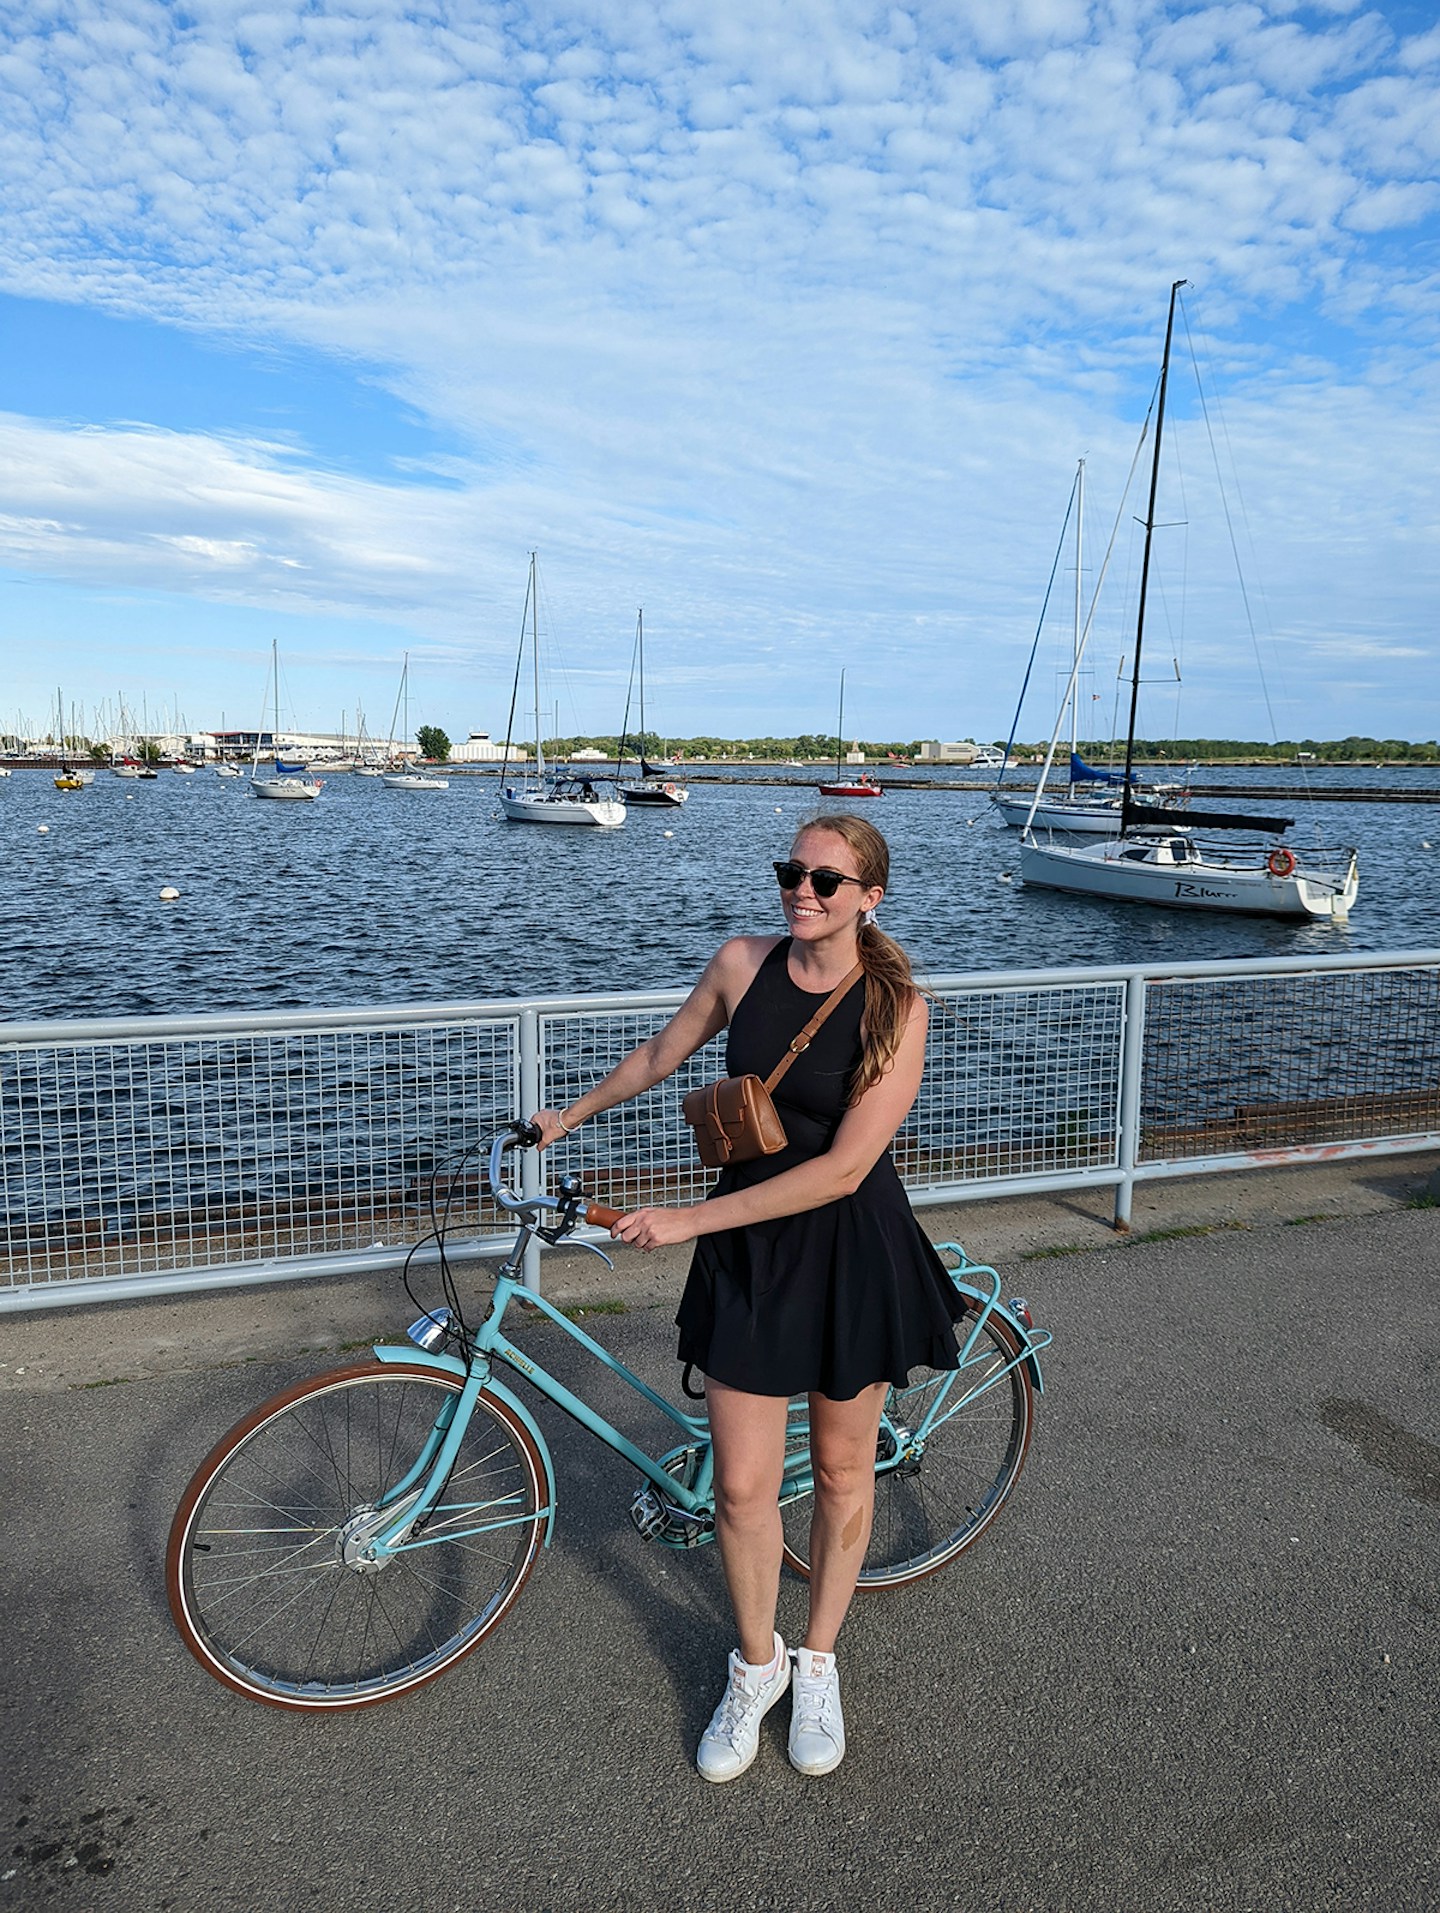 Best Buys of 2022: Achielle Louise Bicycle from Belgium - this classic Dutch bike is perfect for leisure and exploring downtown Toronto